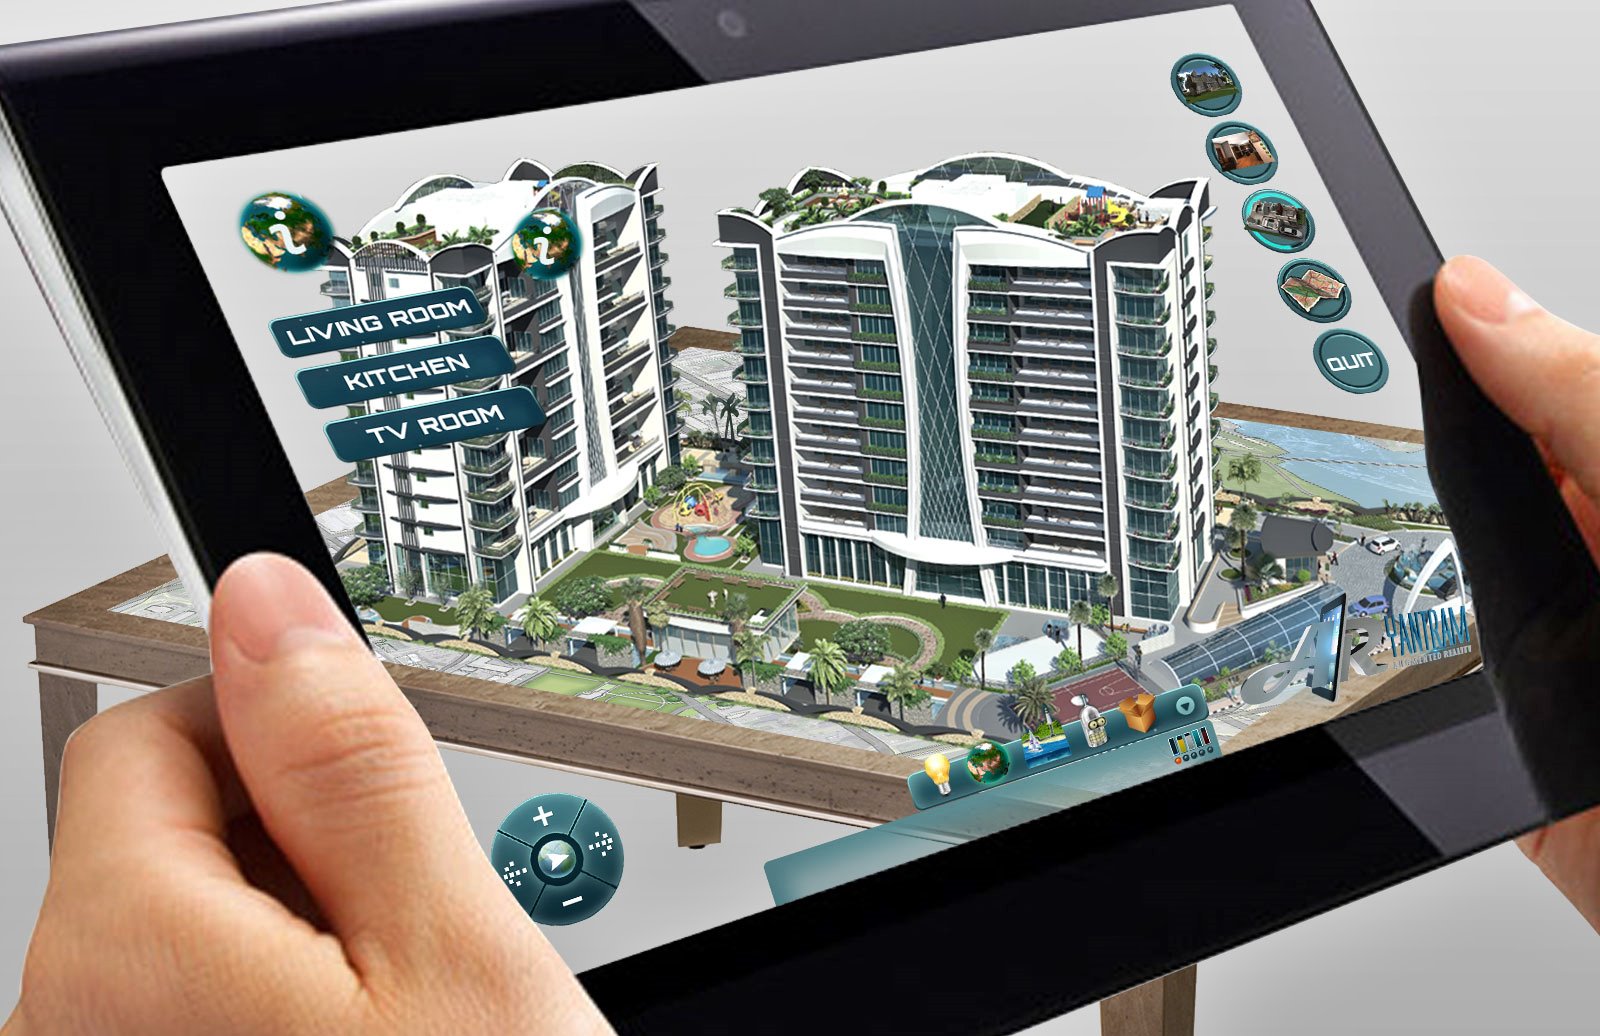 Augmented Reality (AR) gives a live view of a physical, real world environment whose elements augmented by computer generated input like sound, video, information, graphics, or GPS data.